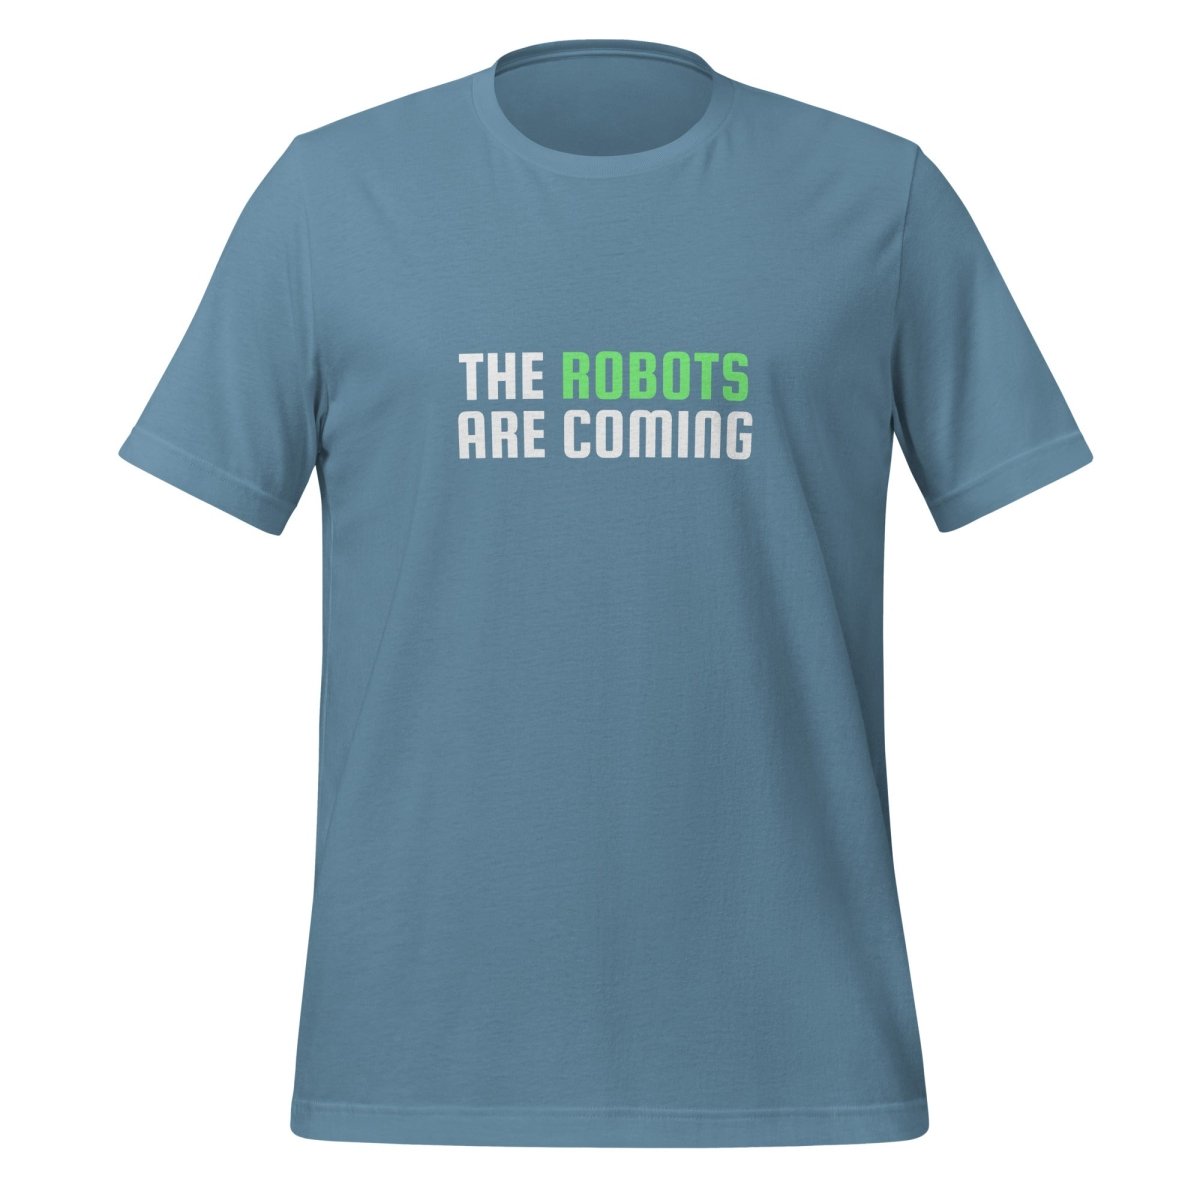 The Robots Are Coming (Green) T - Shirt 2 (unisex) - Steel Blue - AI Store